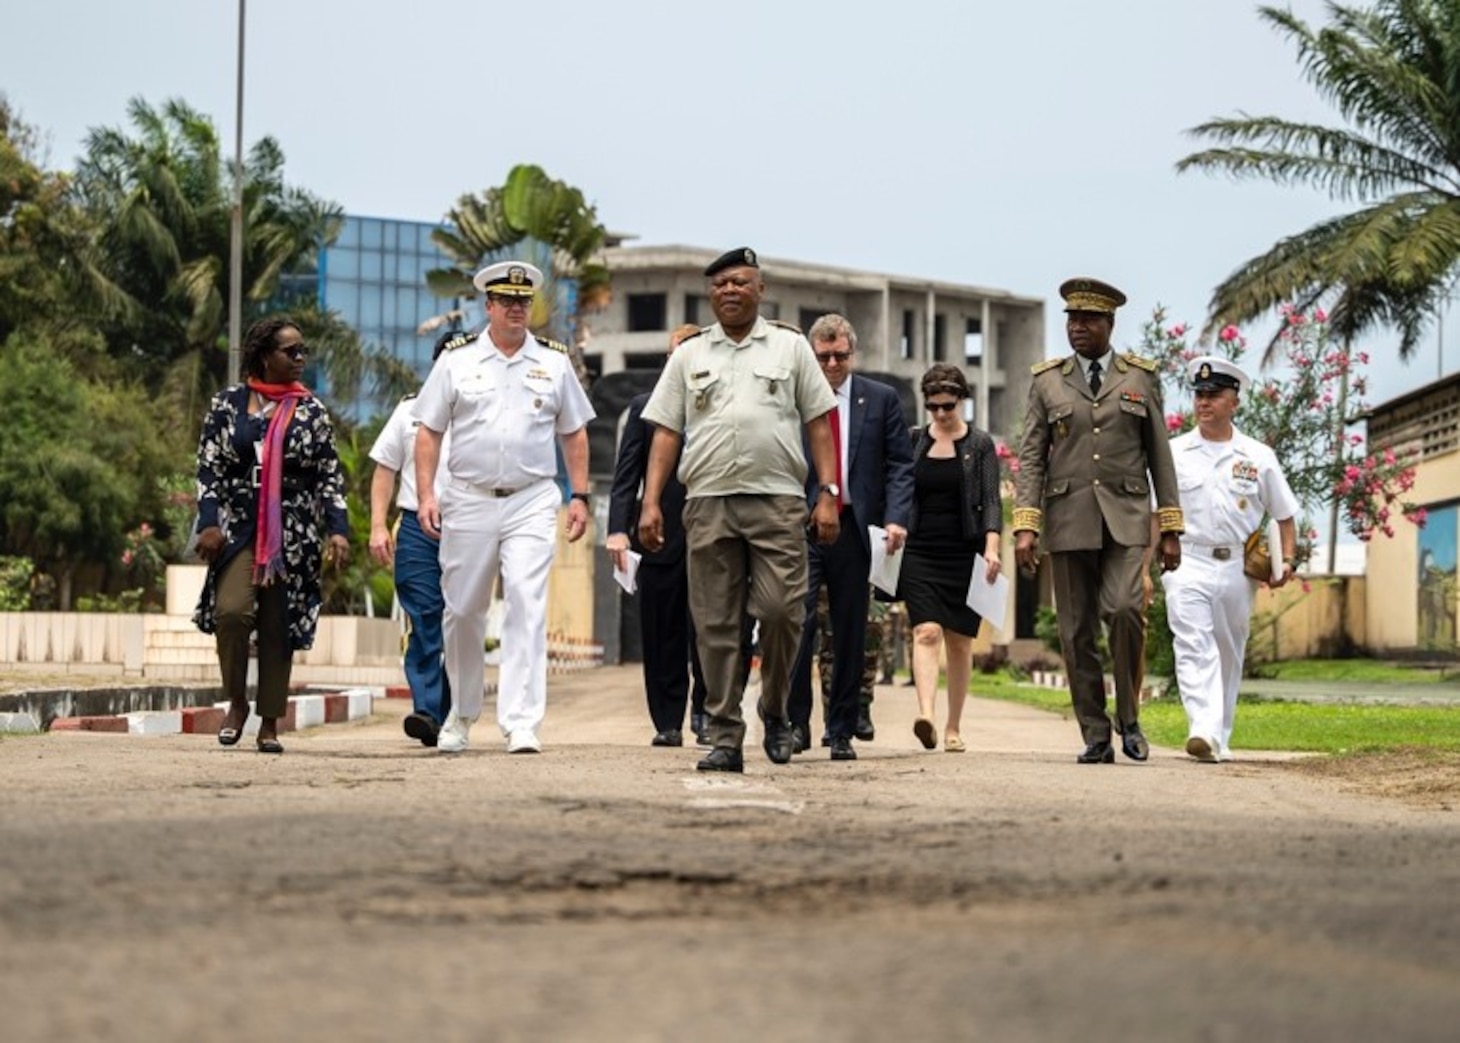 (Sep. 12, 2022) Capt. Chad Graham, commanding officer of the Lewis B. Puller-class expeditionary sea base USS Hershel "Woody" Williams (ESB 4), walks with Republic of Congo senior military leaders, embassy staff and dignitaries while visiting an Armed Forces of the Republic of Congo installation, Sep. 12, 2022. Hershel "Woody" Williams is rotationally deployed to the U.S. Naval Forces Africa area of operations, employed by U.S. Sixth Fleet, to defend U.S., allied and partner interests.